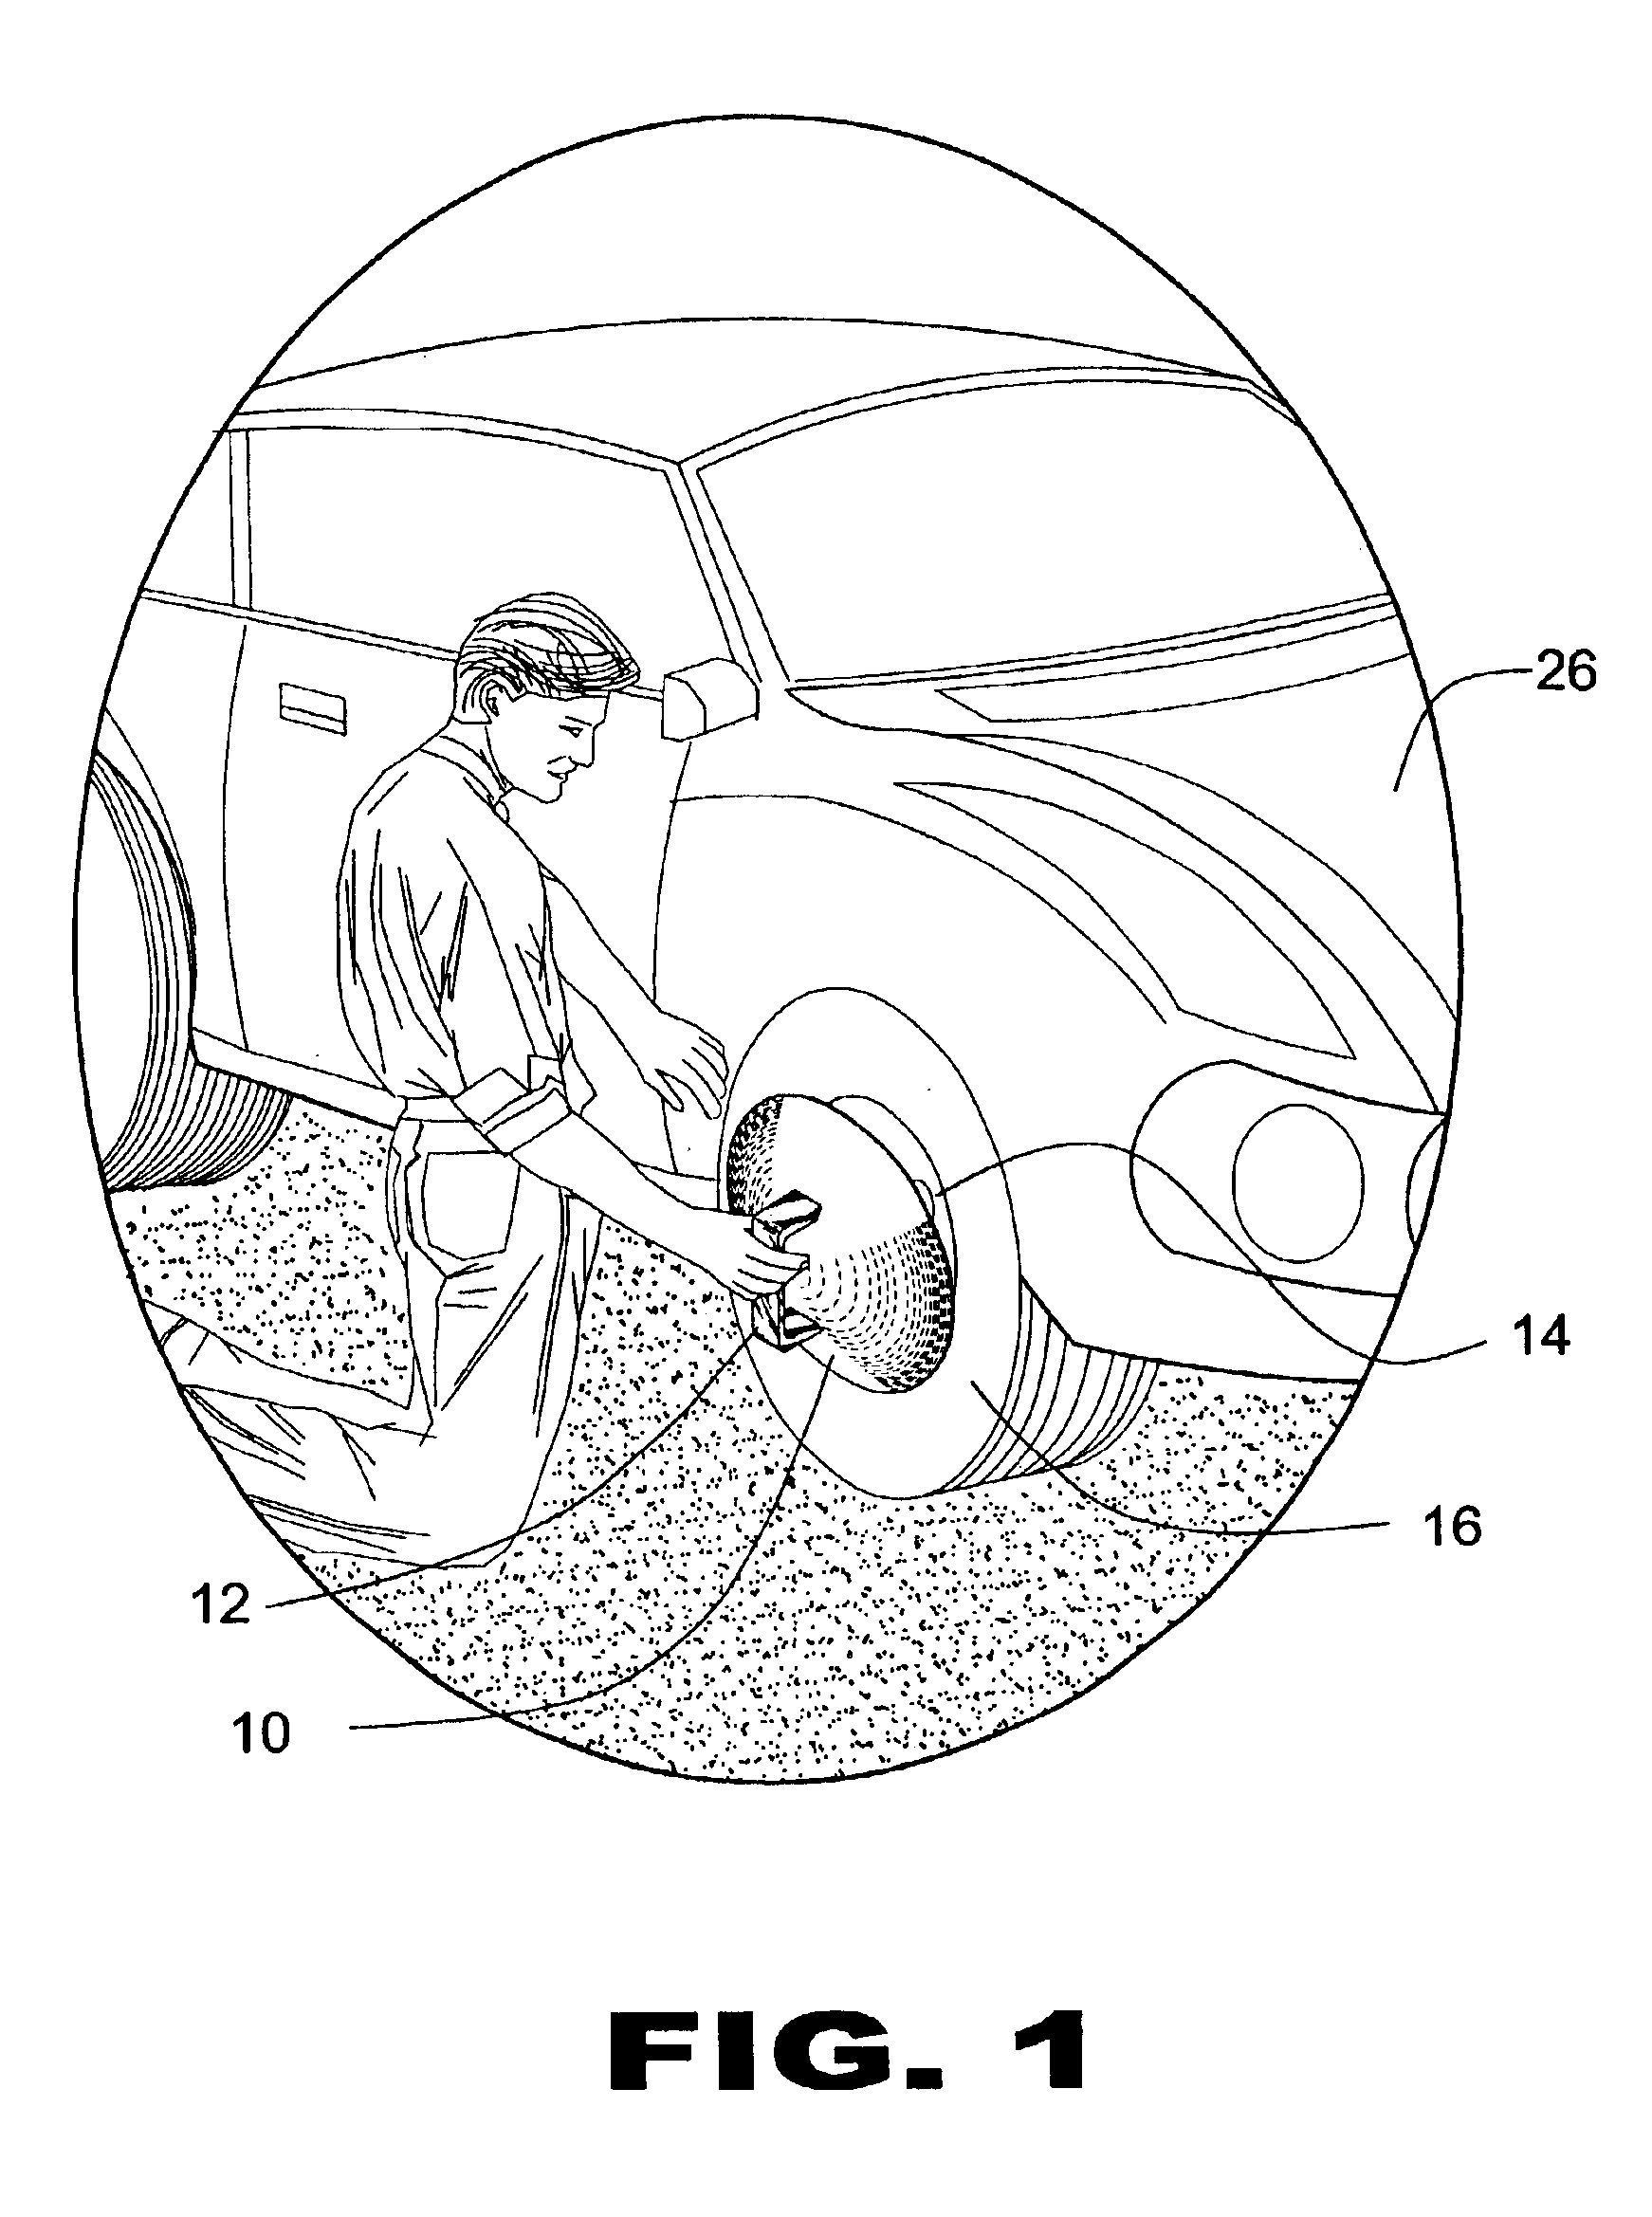 Wheel cover device